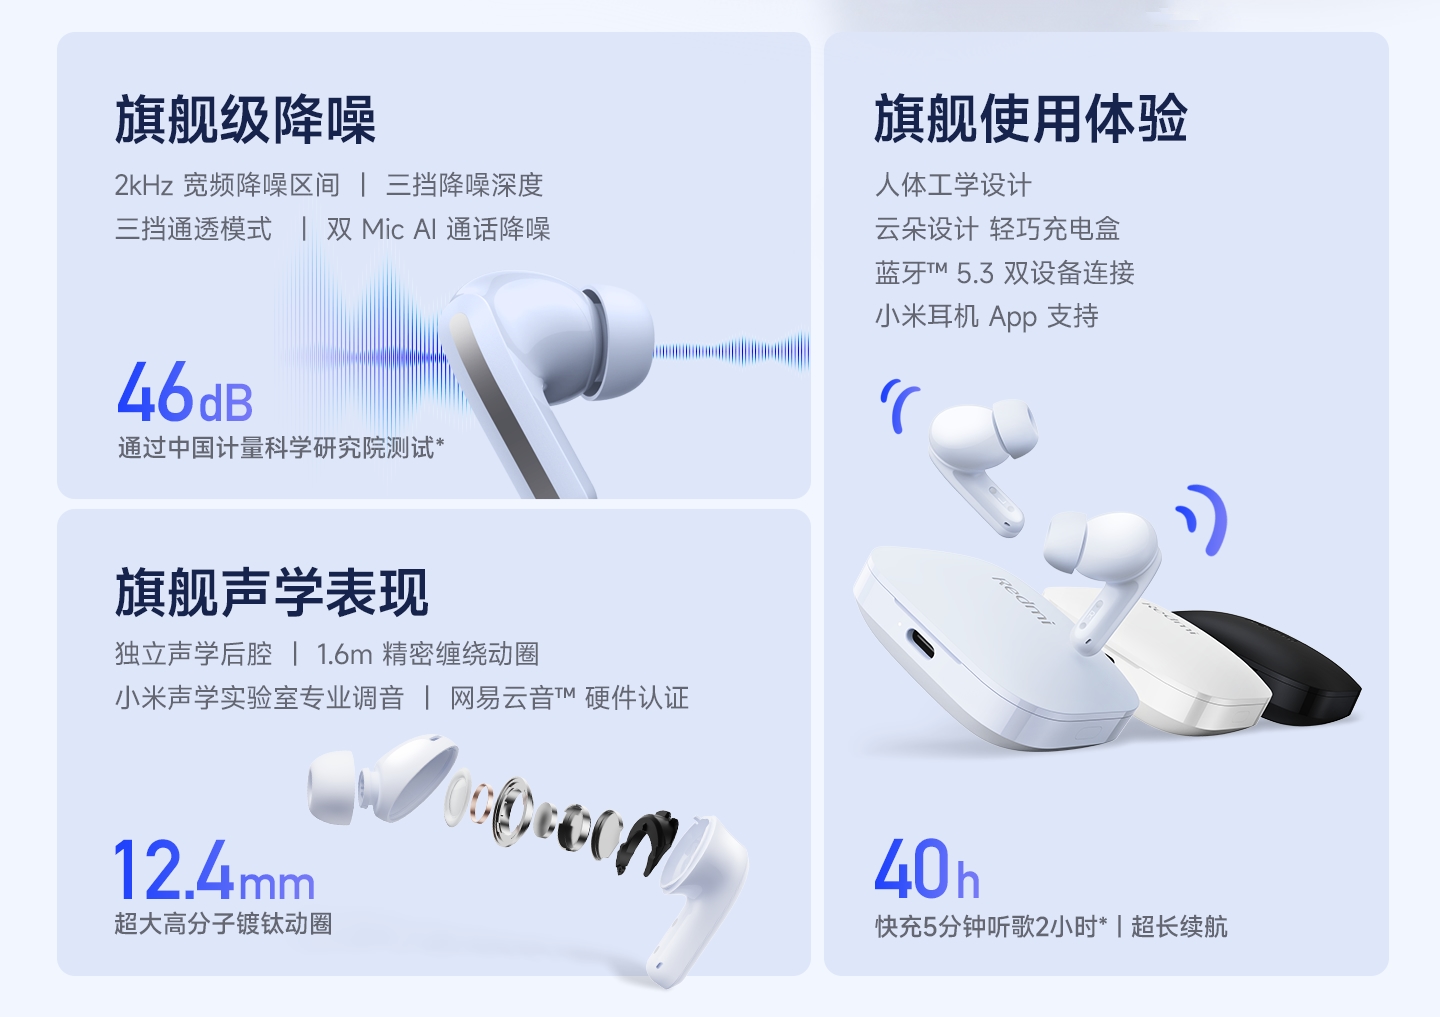 Redmi Buds 5 launched: 46db ANC, Bluetooth 5.3, and up to 40 hours battery!